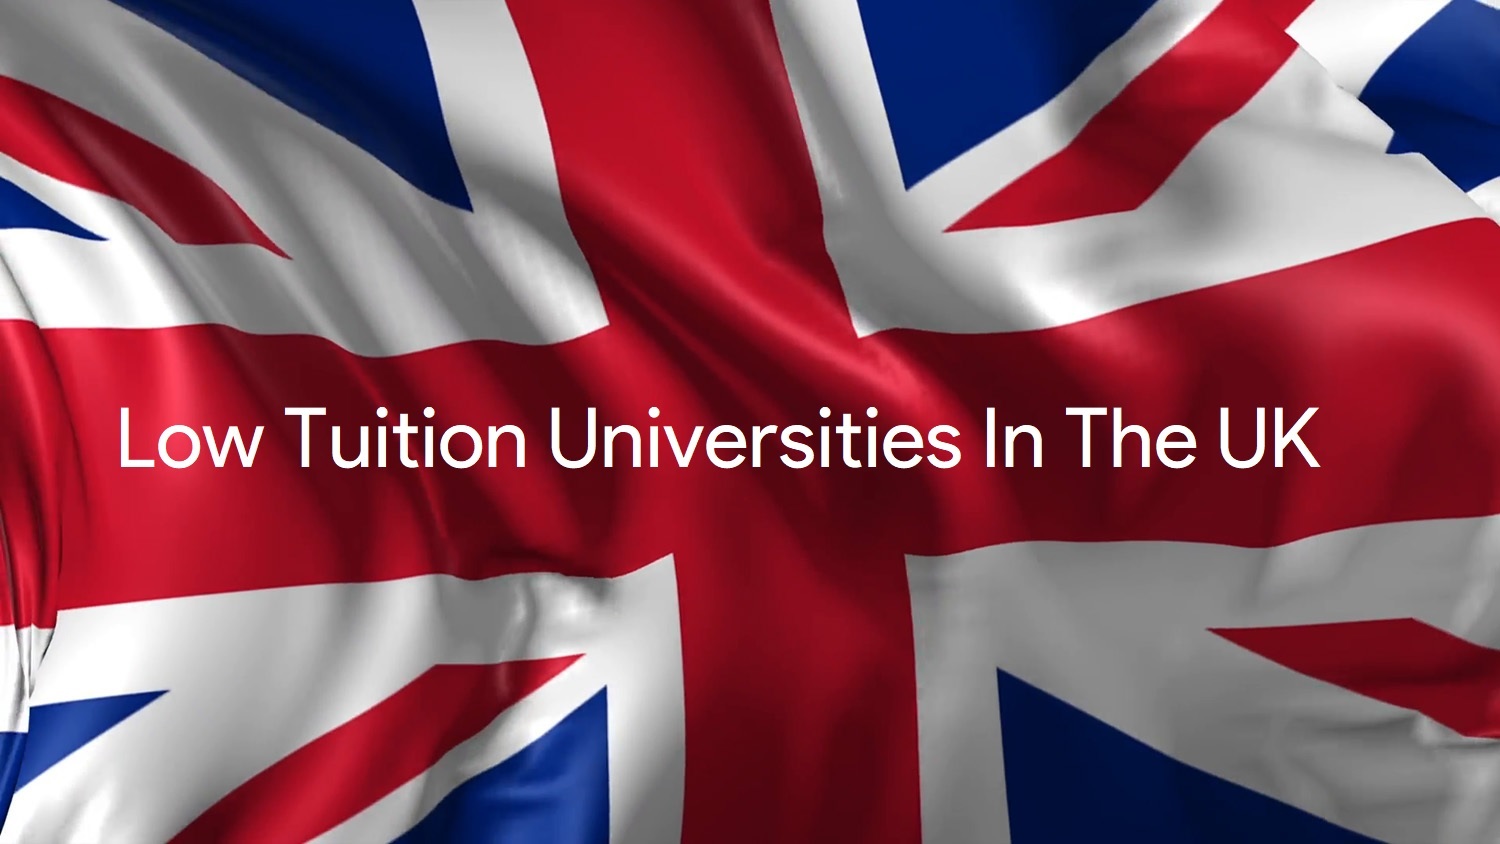 Low Tuition Universities In The UK